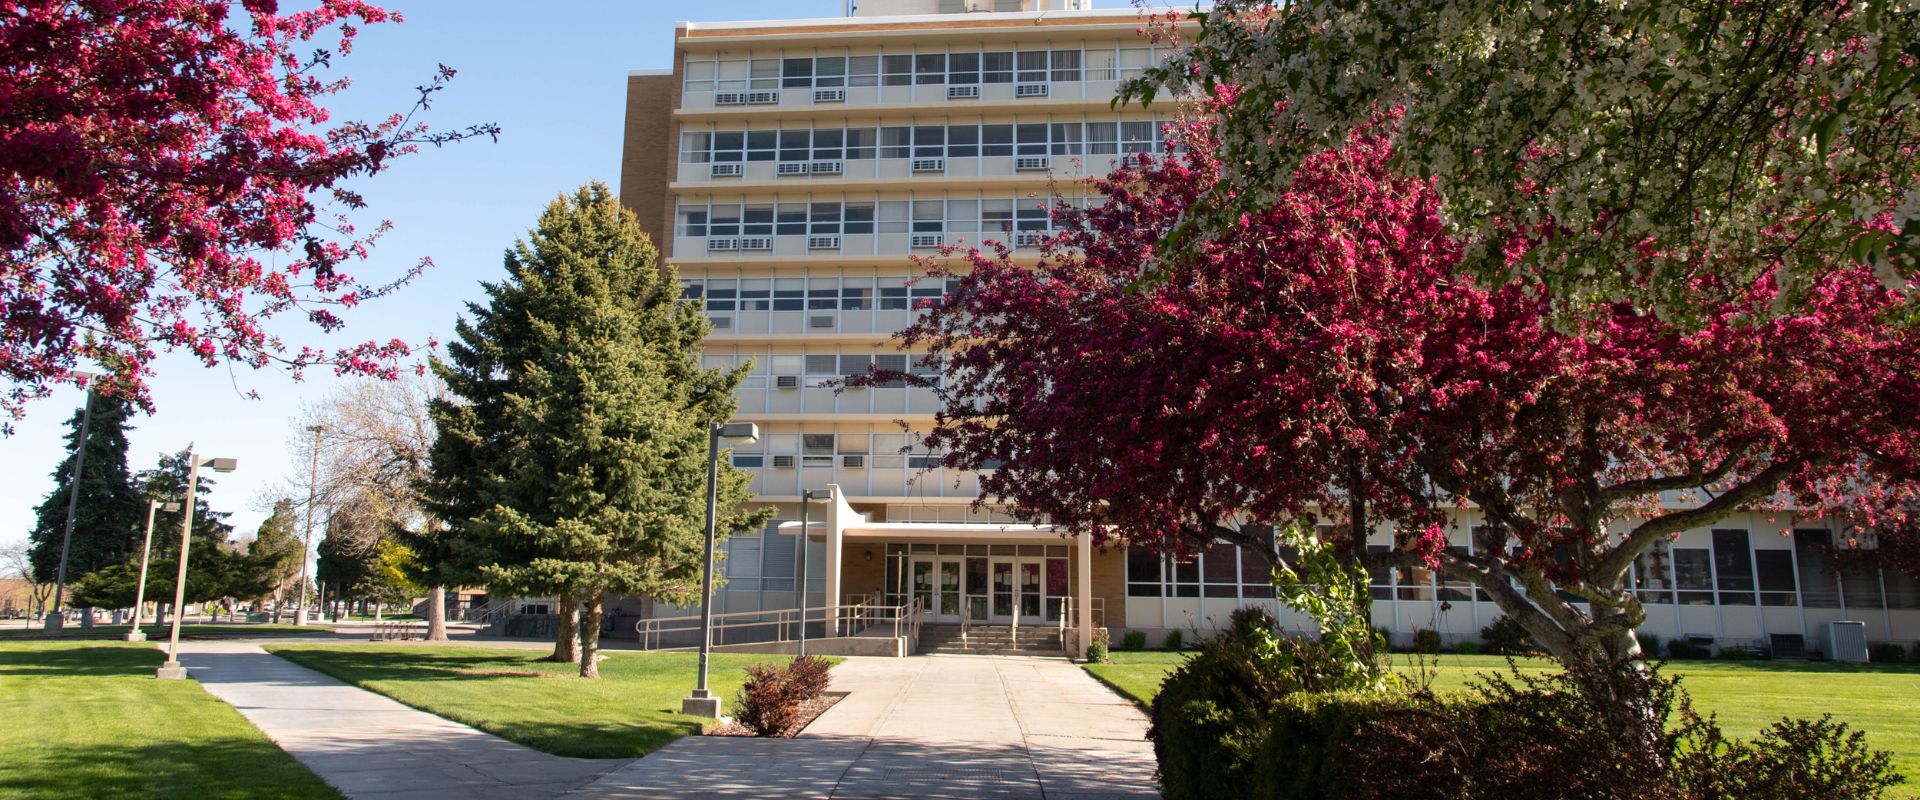 The front of Garrison Hall, a tall building with many windows. Spring blossoming trees line the walkway to the front entrance.